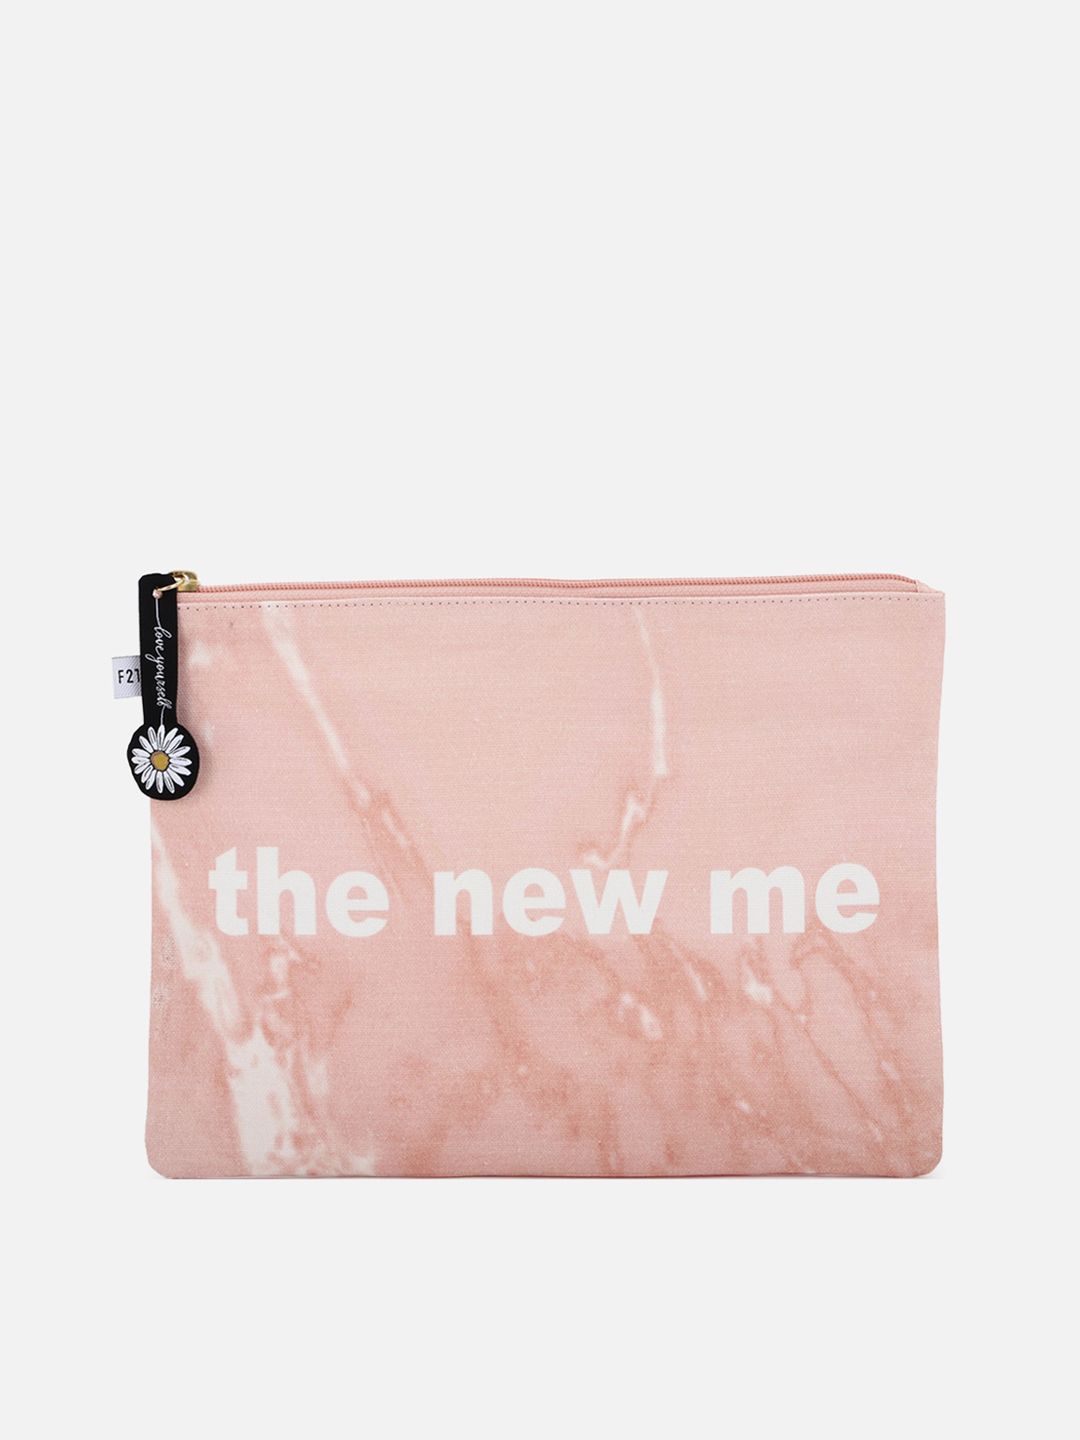 FOREVER 21 Pink Printed Structured Shoulder Bag Price in India